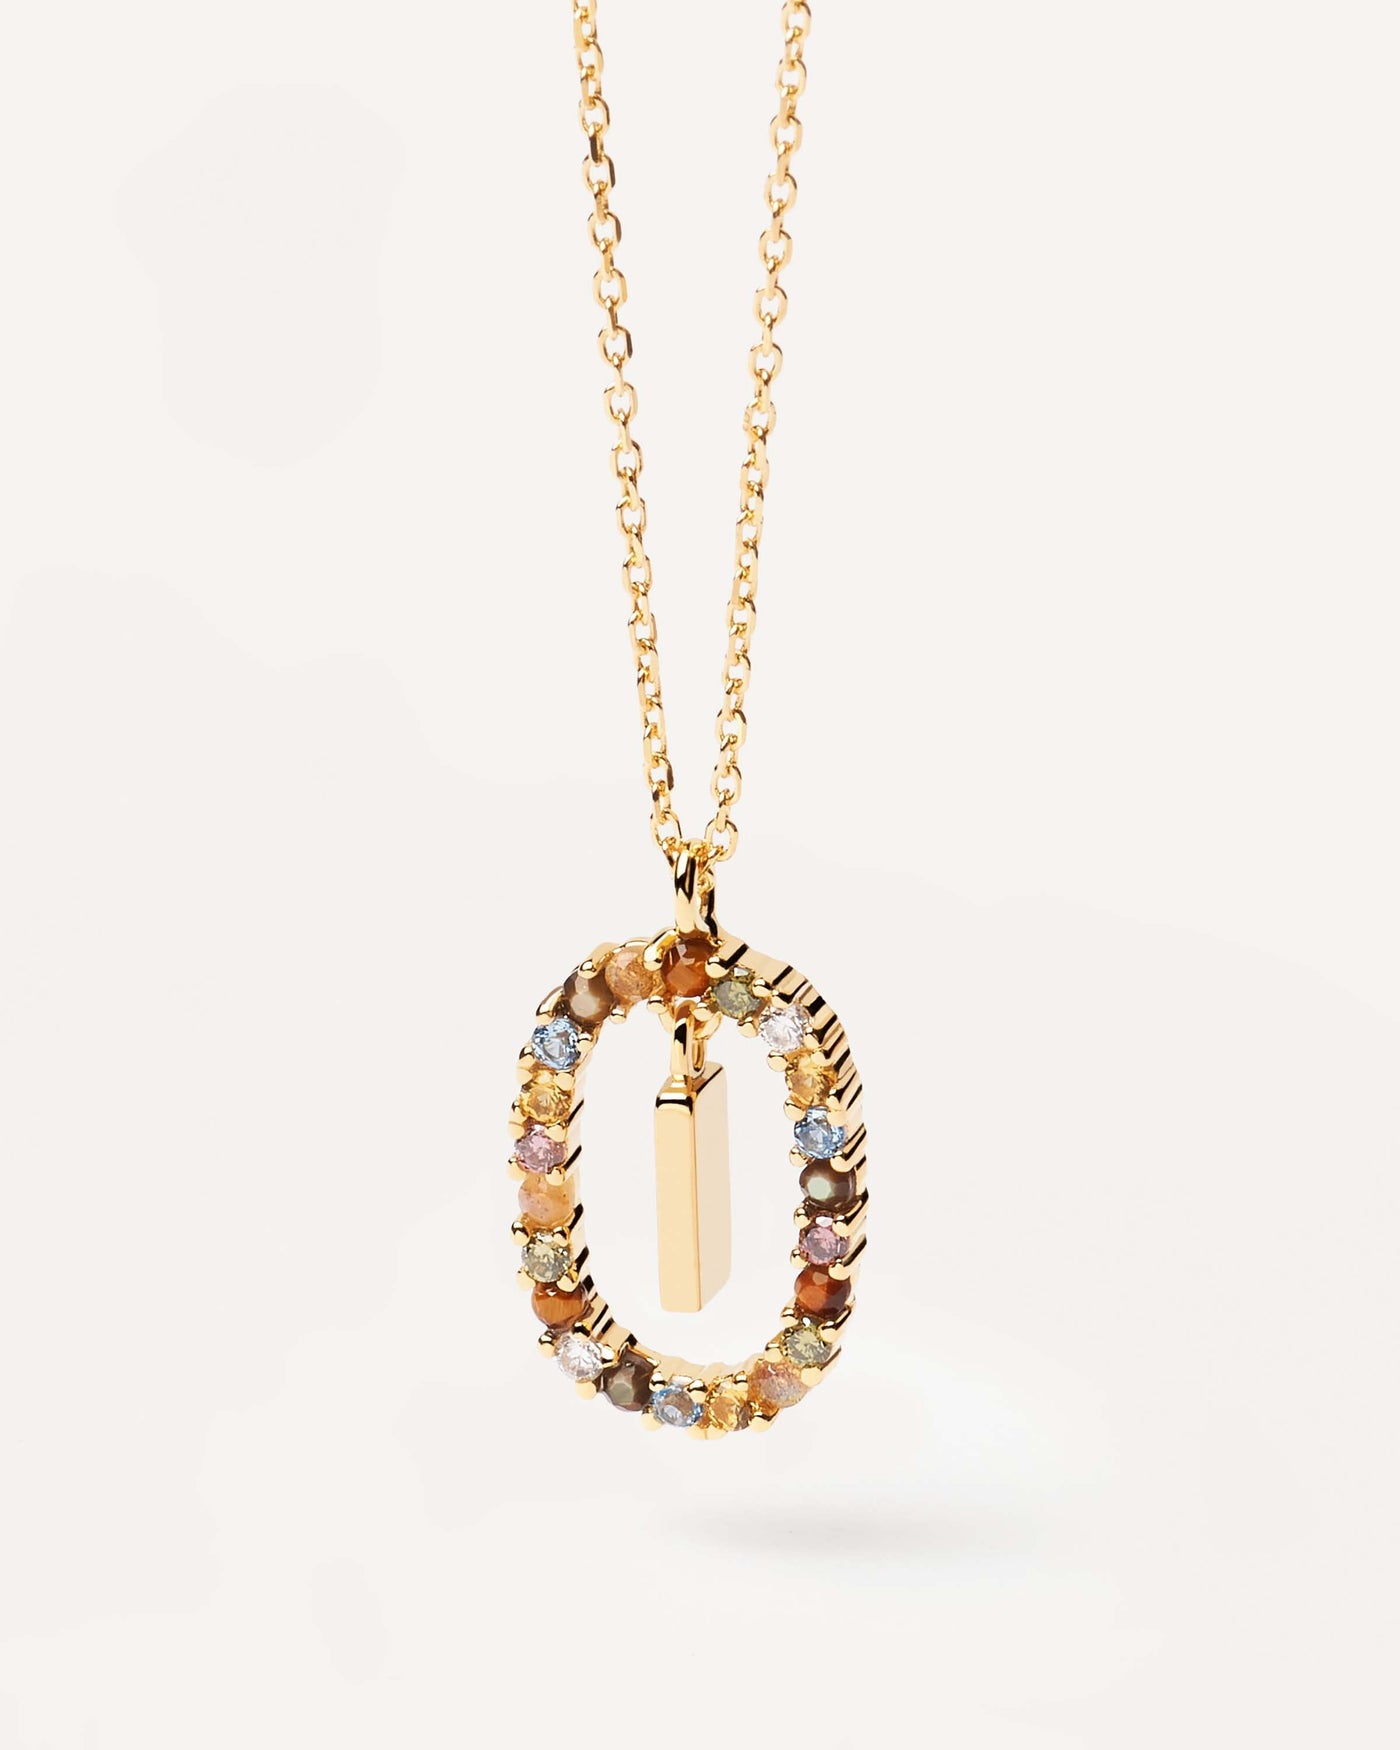 2023 Selection | Letter I necklace. Initial I necklace in gold-plated silver, circled by colorful gemstones. Get the latest arrival from PDPAOLA. Place your order safely and get this Best Seller. Free Shipping.